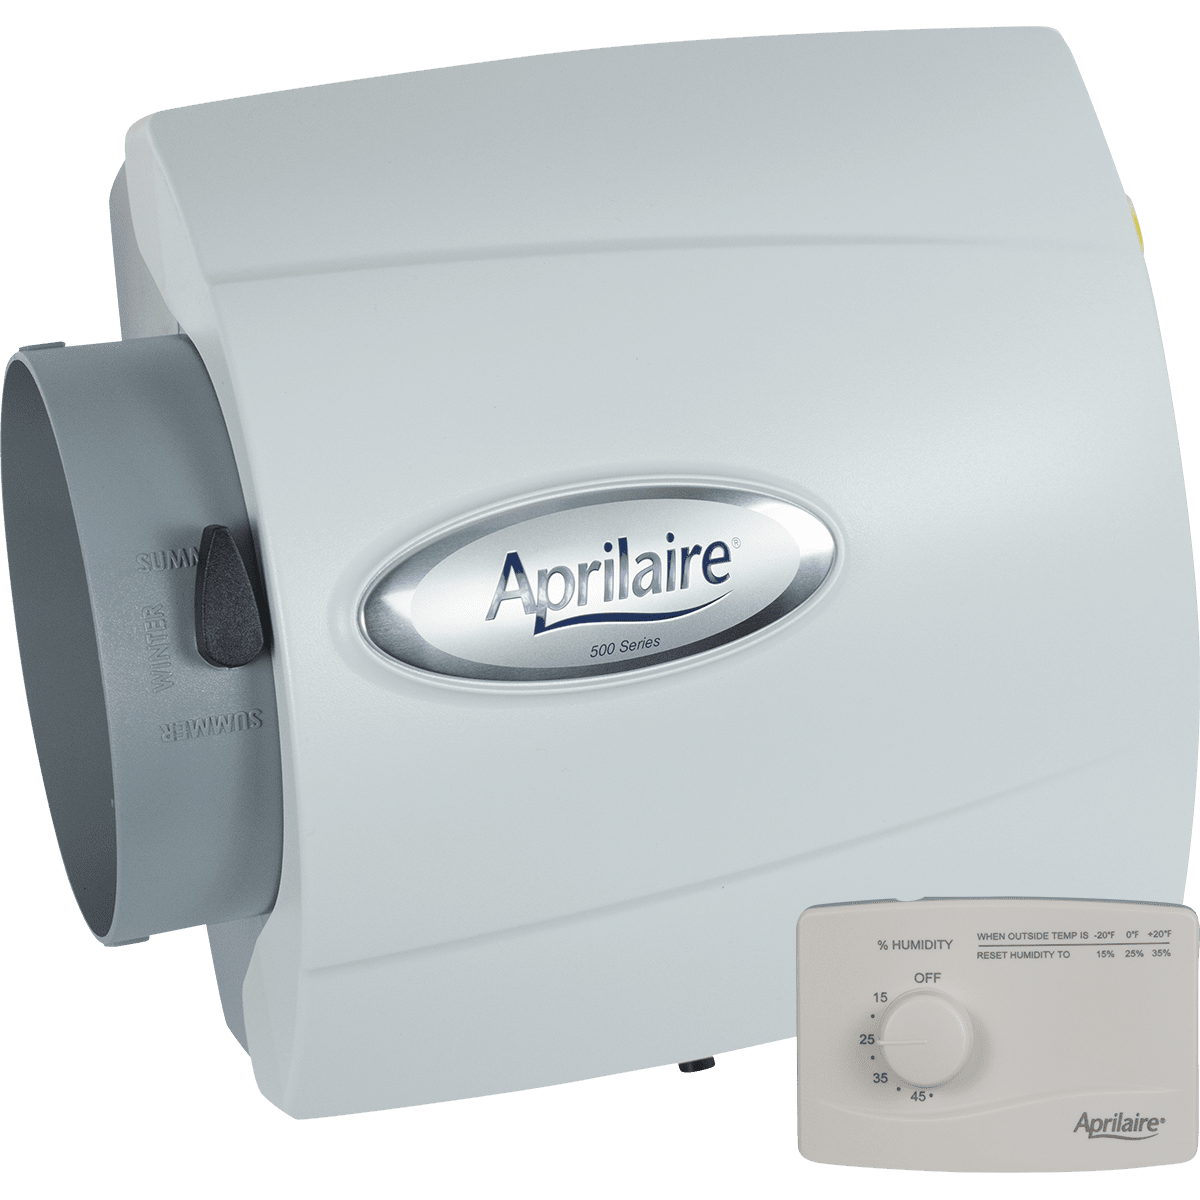 Aprilaire 500M Whole House Humidifier Manual Compact Furnace